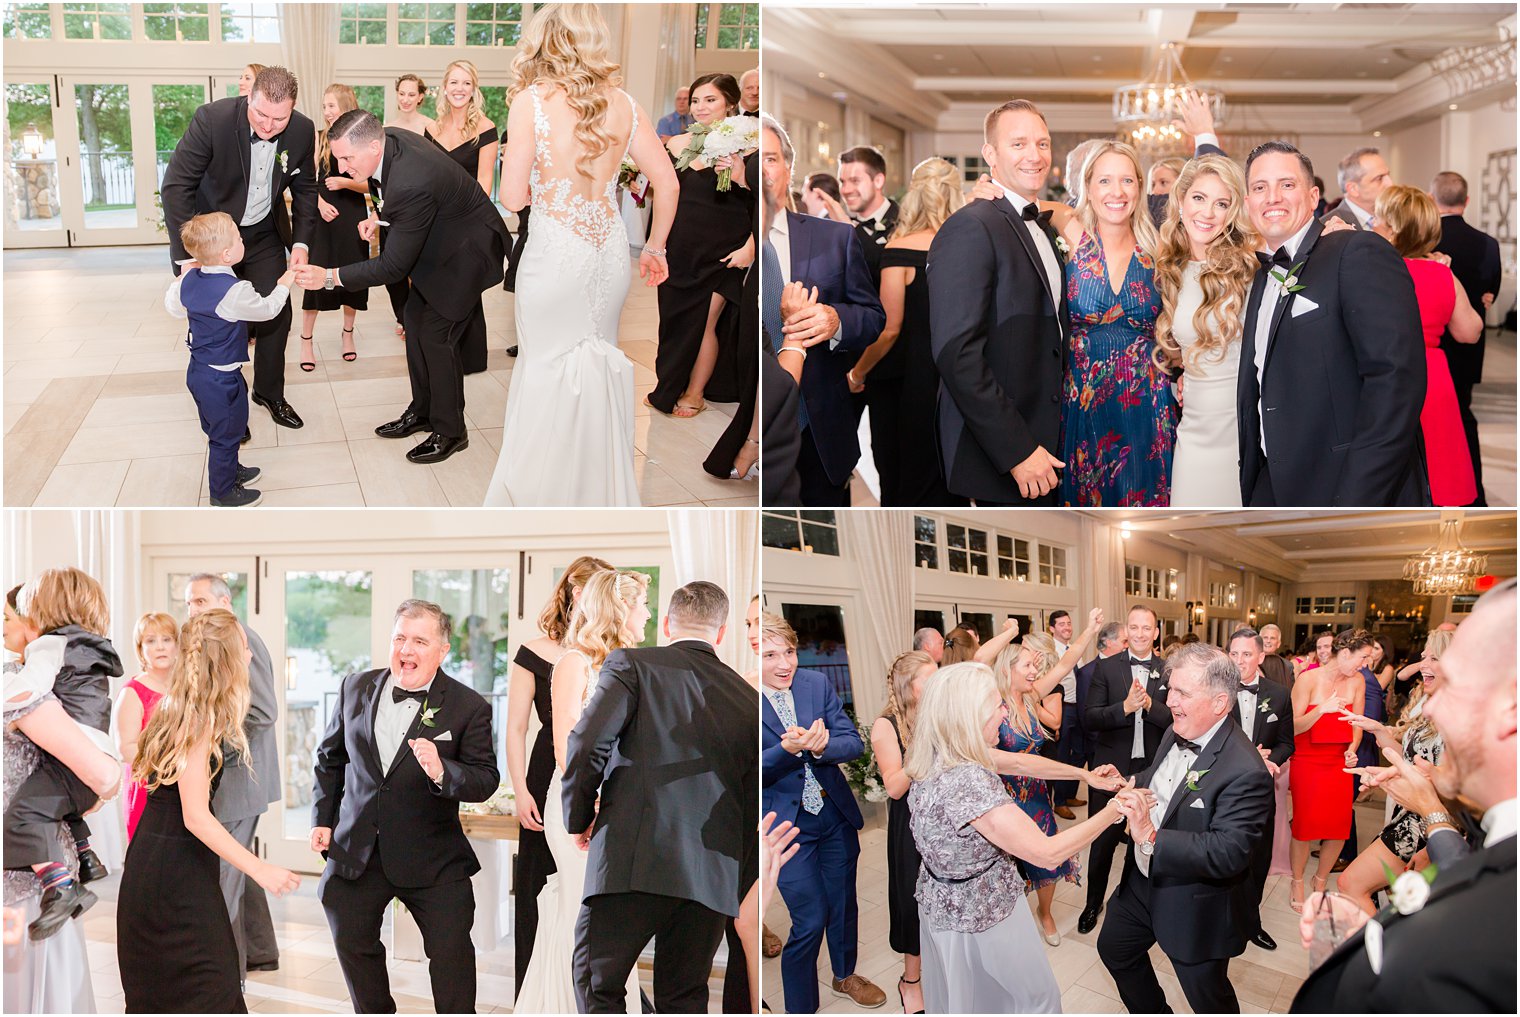 wedding reception dancing photos at Indian Trail Club in Franklin Lakes, NJ